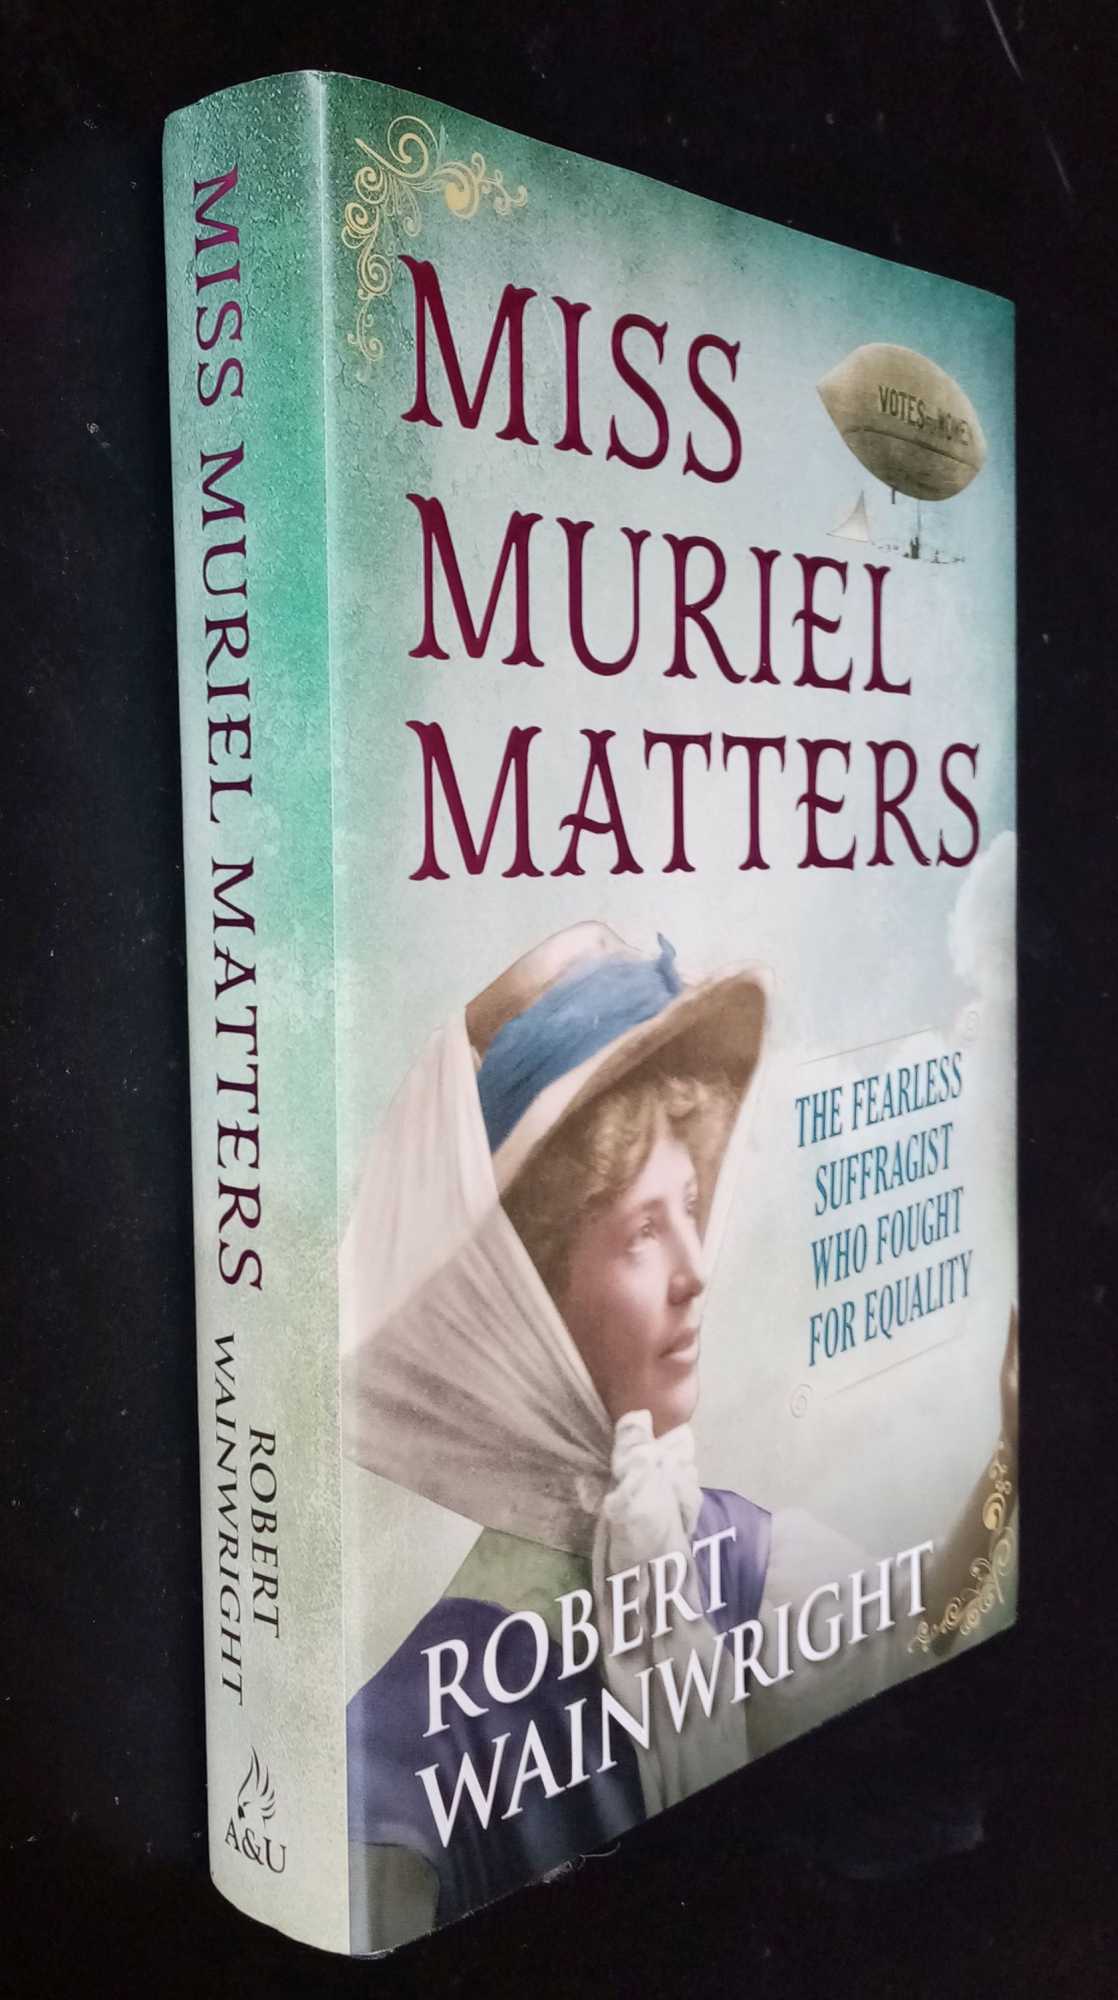 Robert Wainwright - Miss Muriel Matters: The fearless suffragist who fought for equality